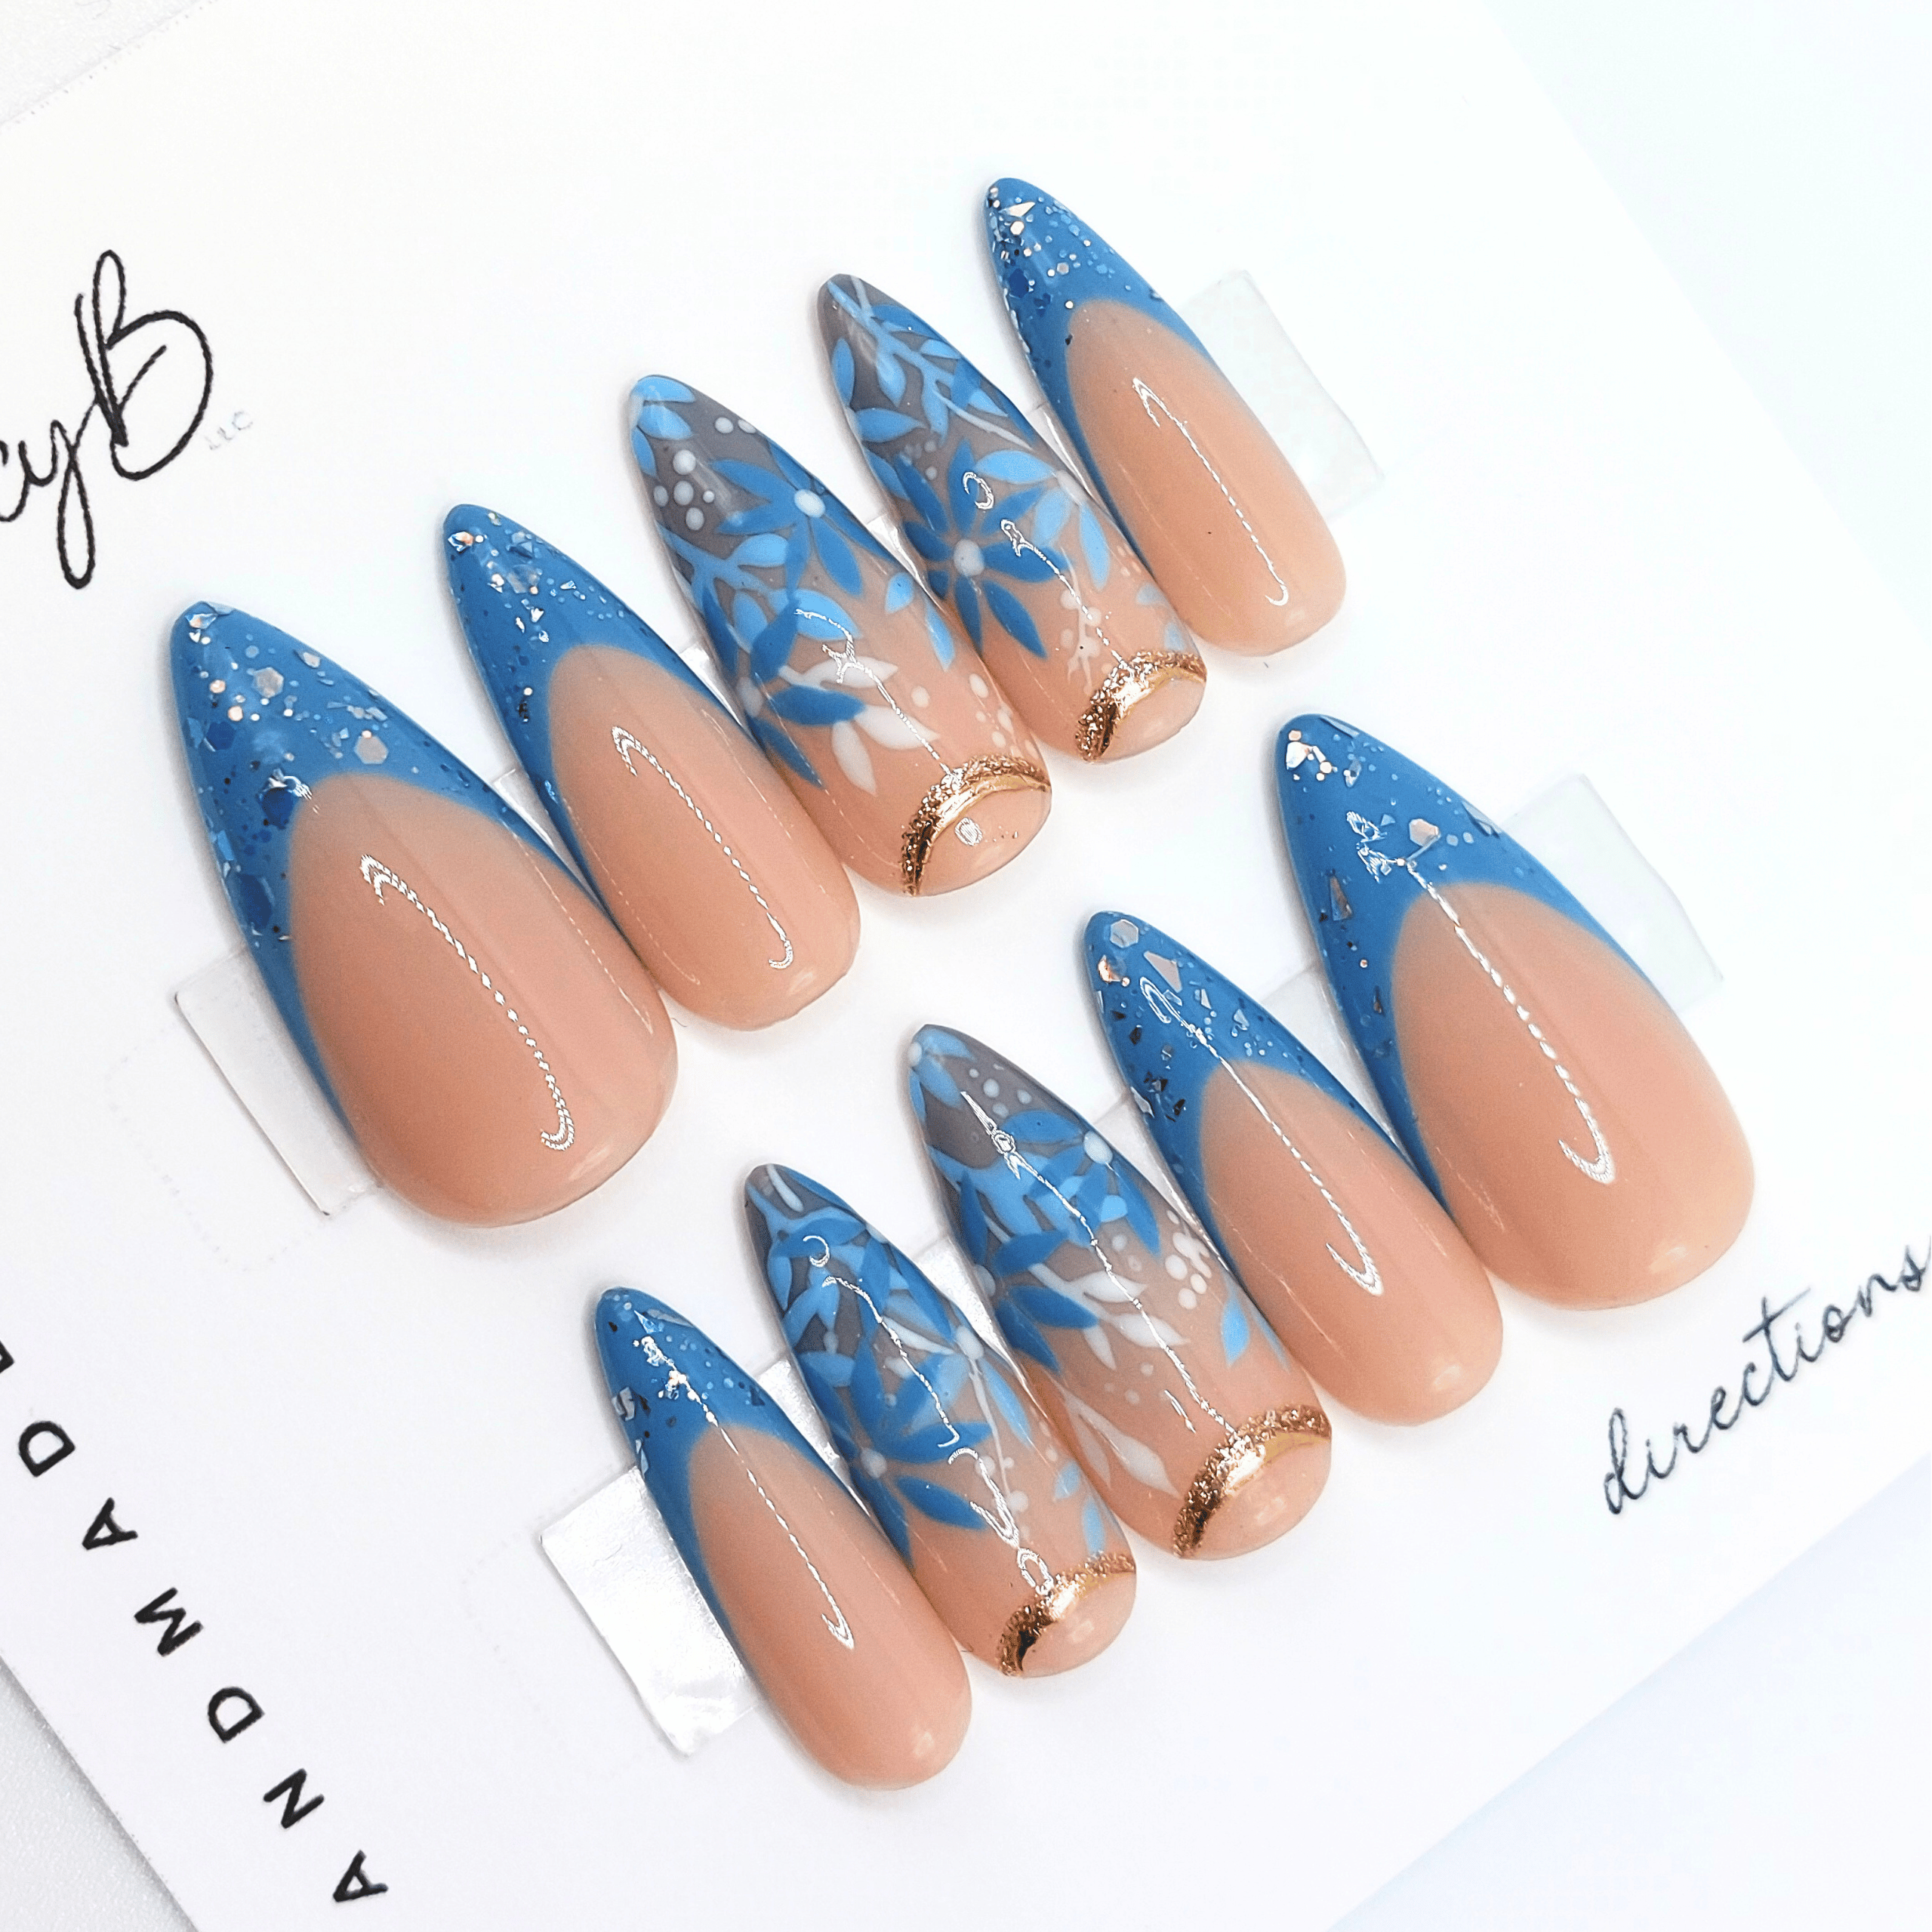 Custom press on nails in medium stiletto with nude base and blue leaves and florals, hand painted flower nails from FancyB.